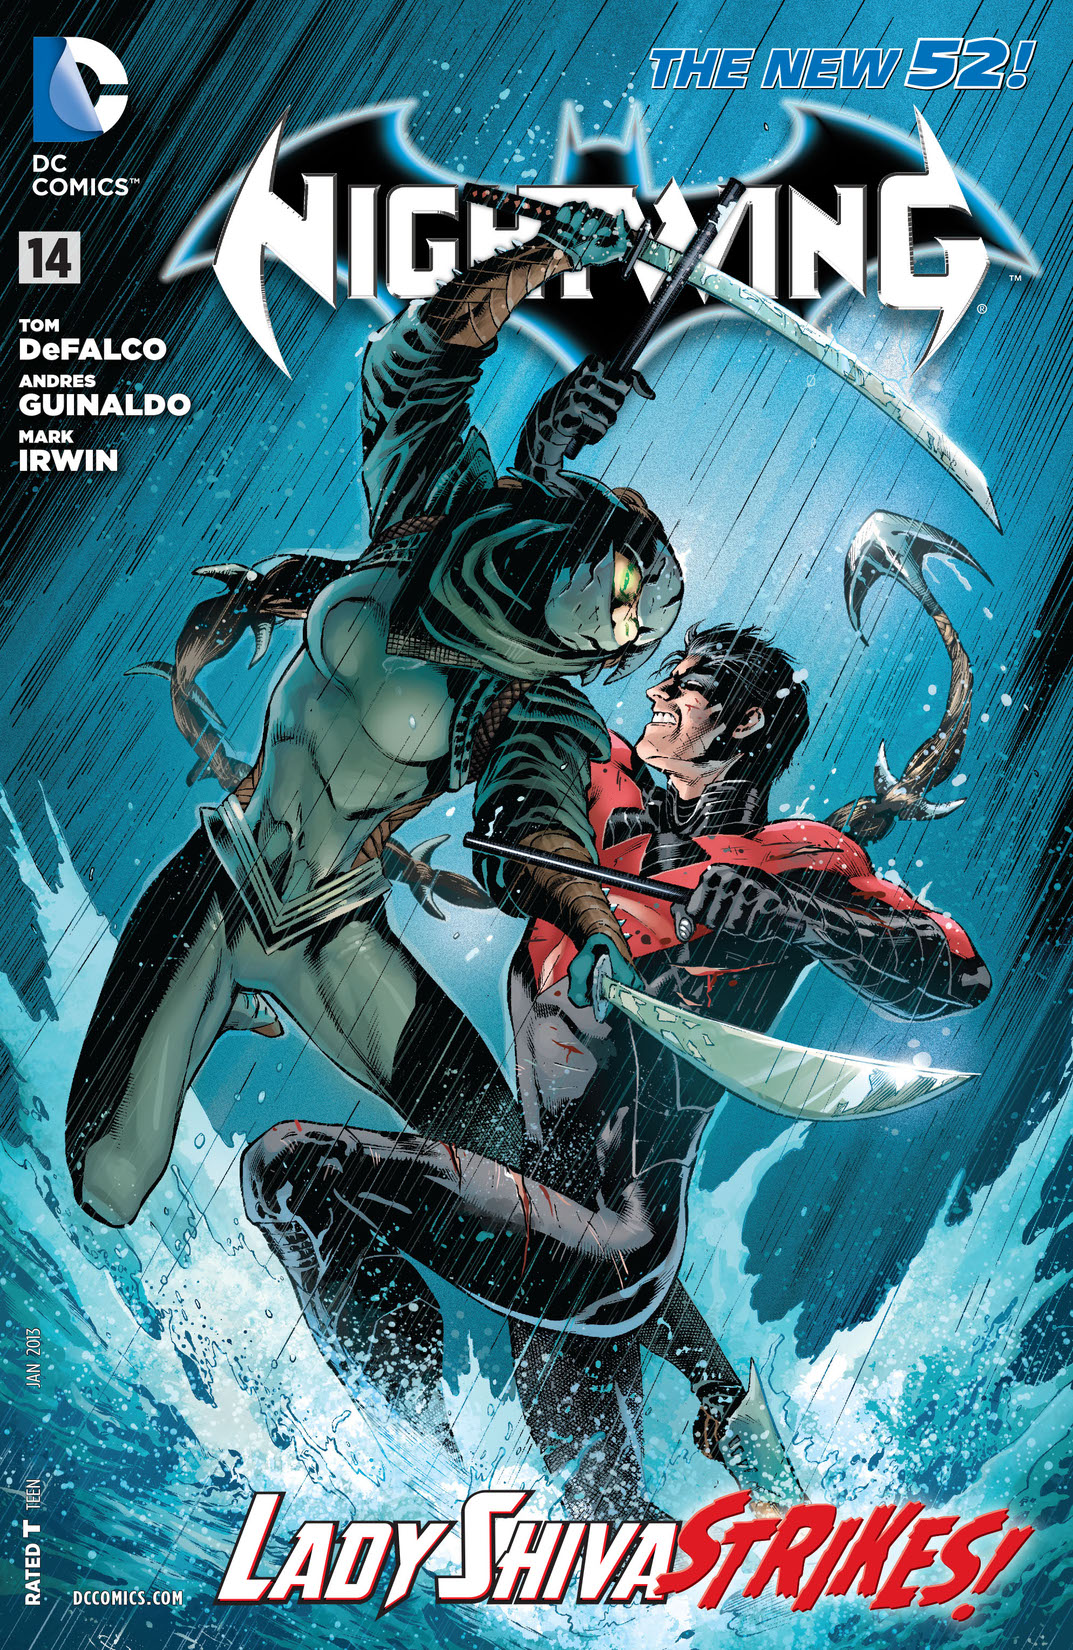 Nightwing (2011-) #14 preview images